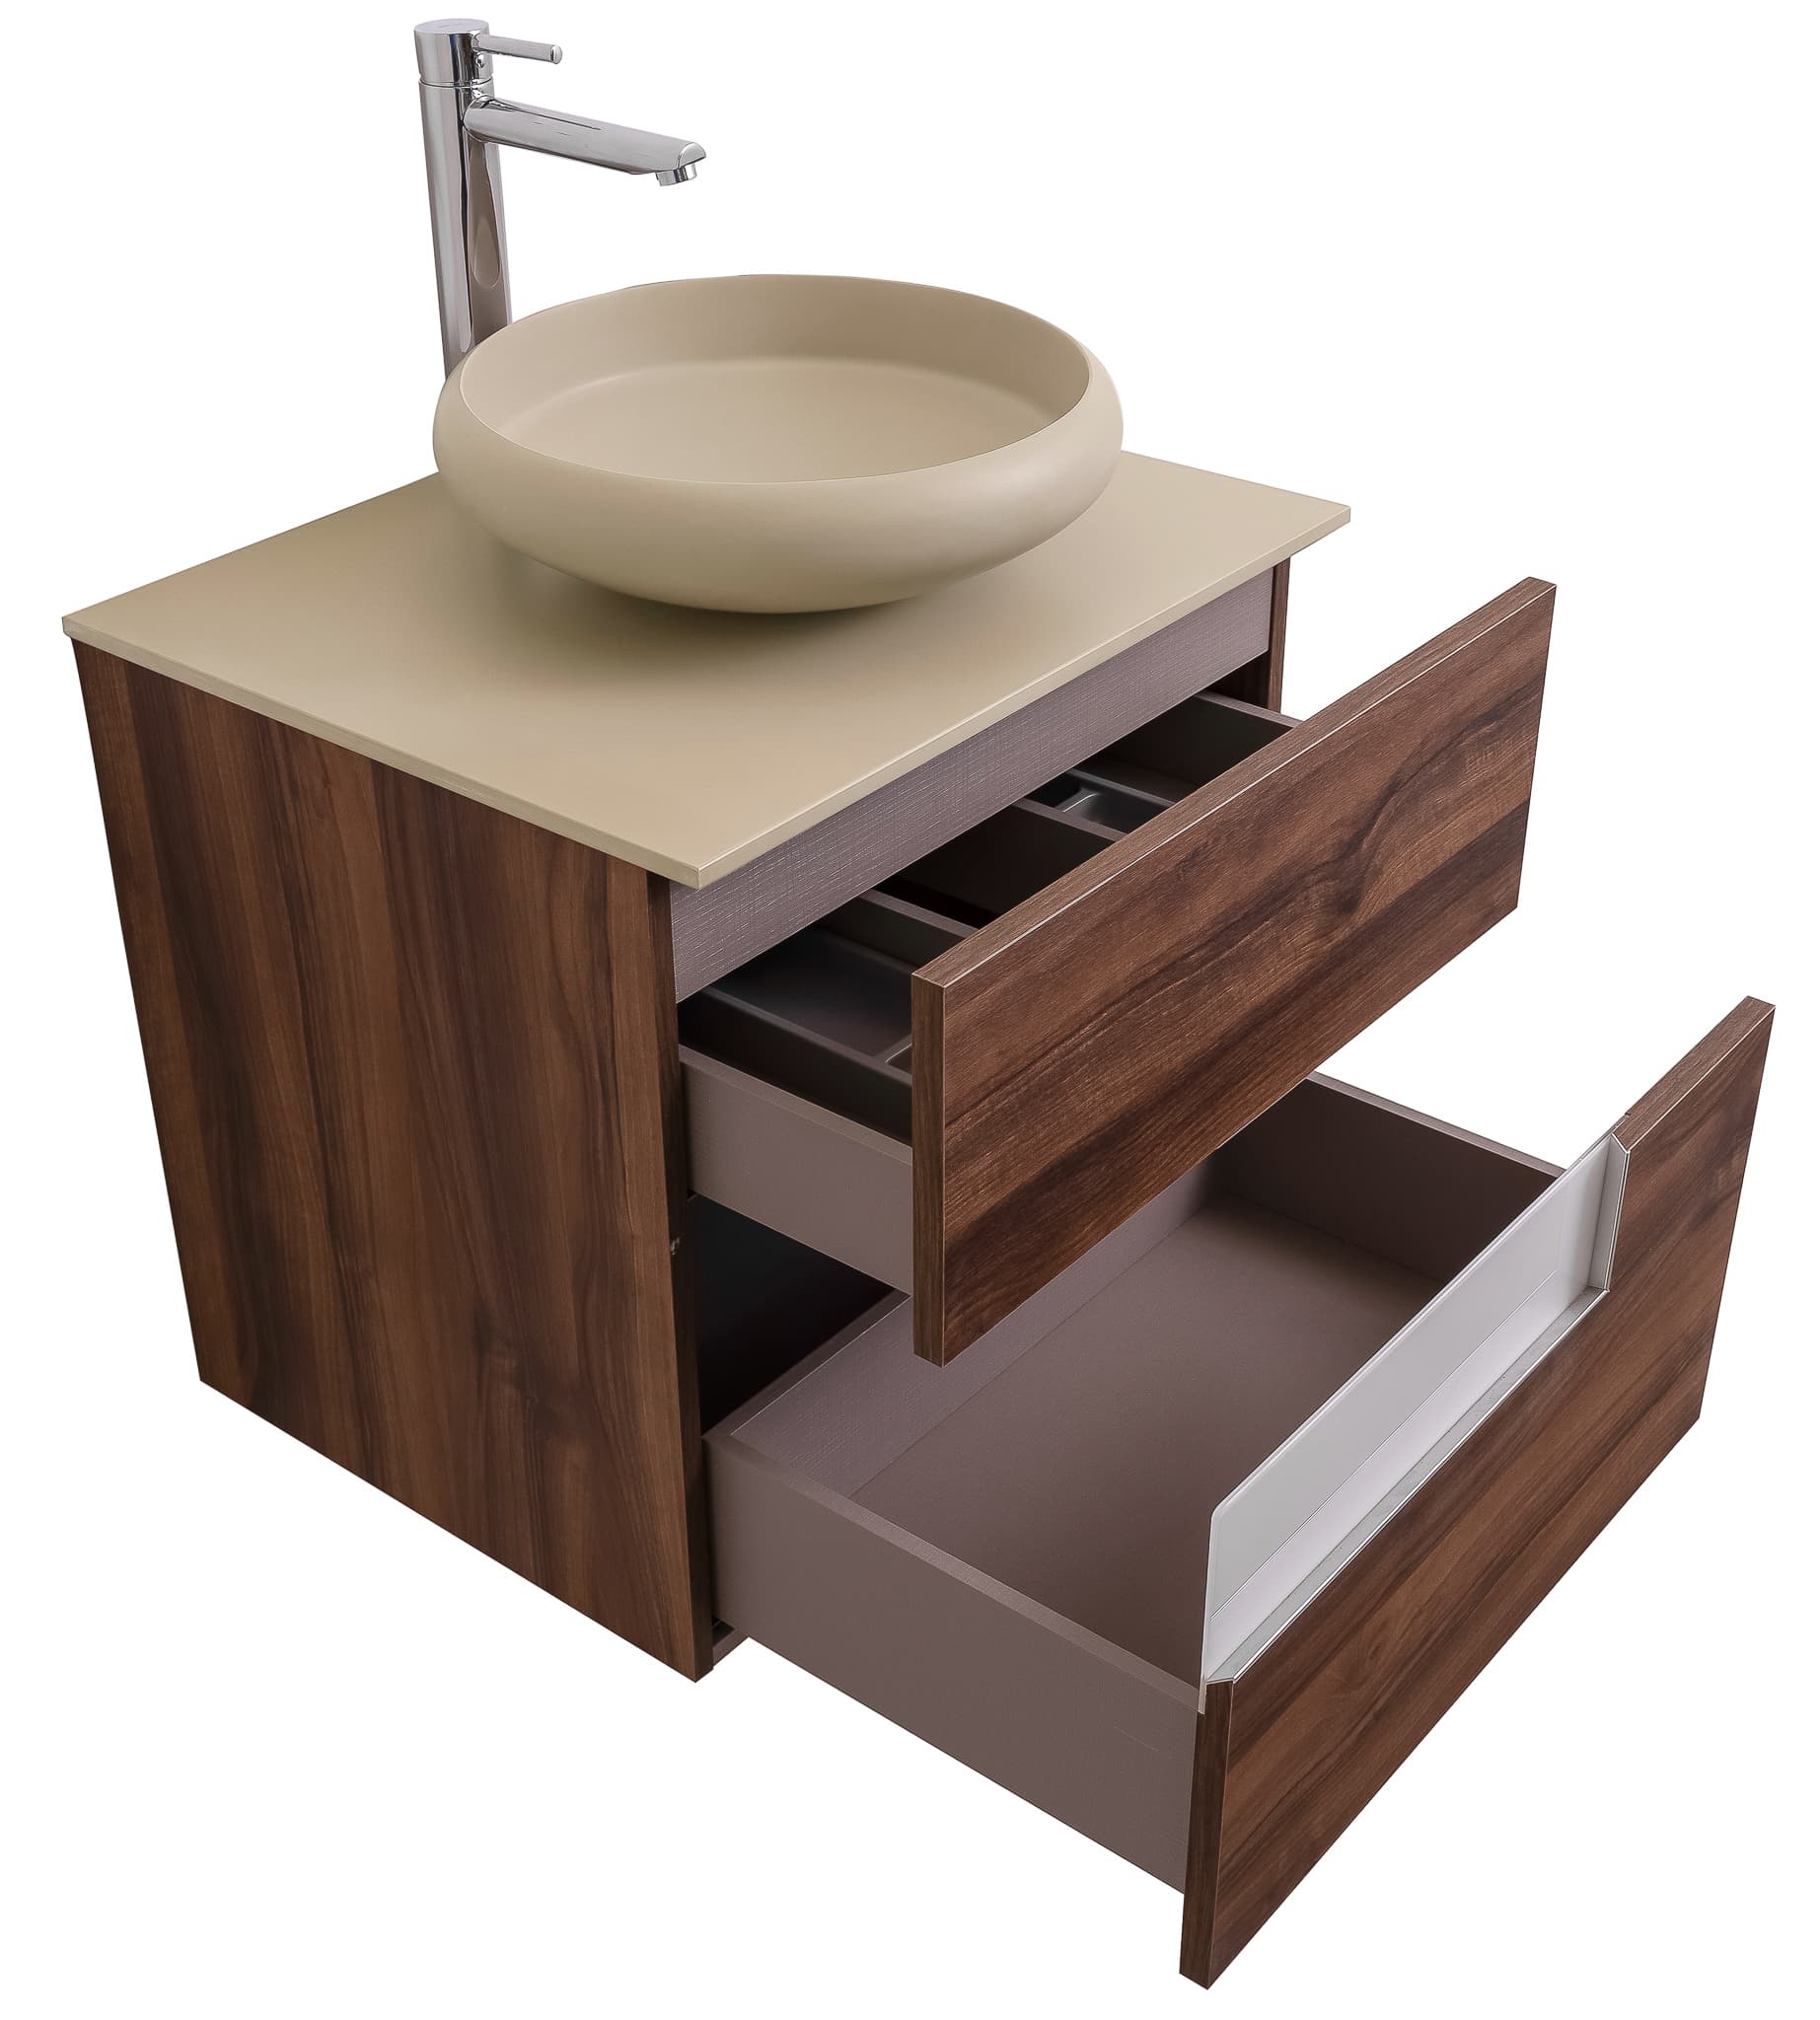 Vision 23.5 Valenti Medium Brown Wood Cabinet, Solid Surface Flat Taupe Counter And Round Solid Surface Taupe Basin 1153, Wall Mounted Modern Vanity Set